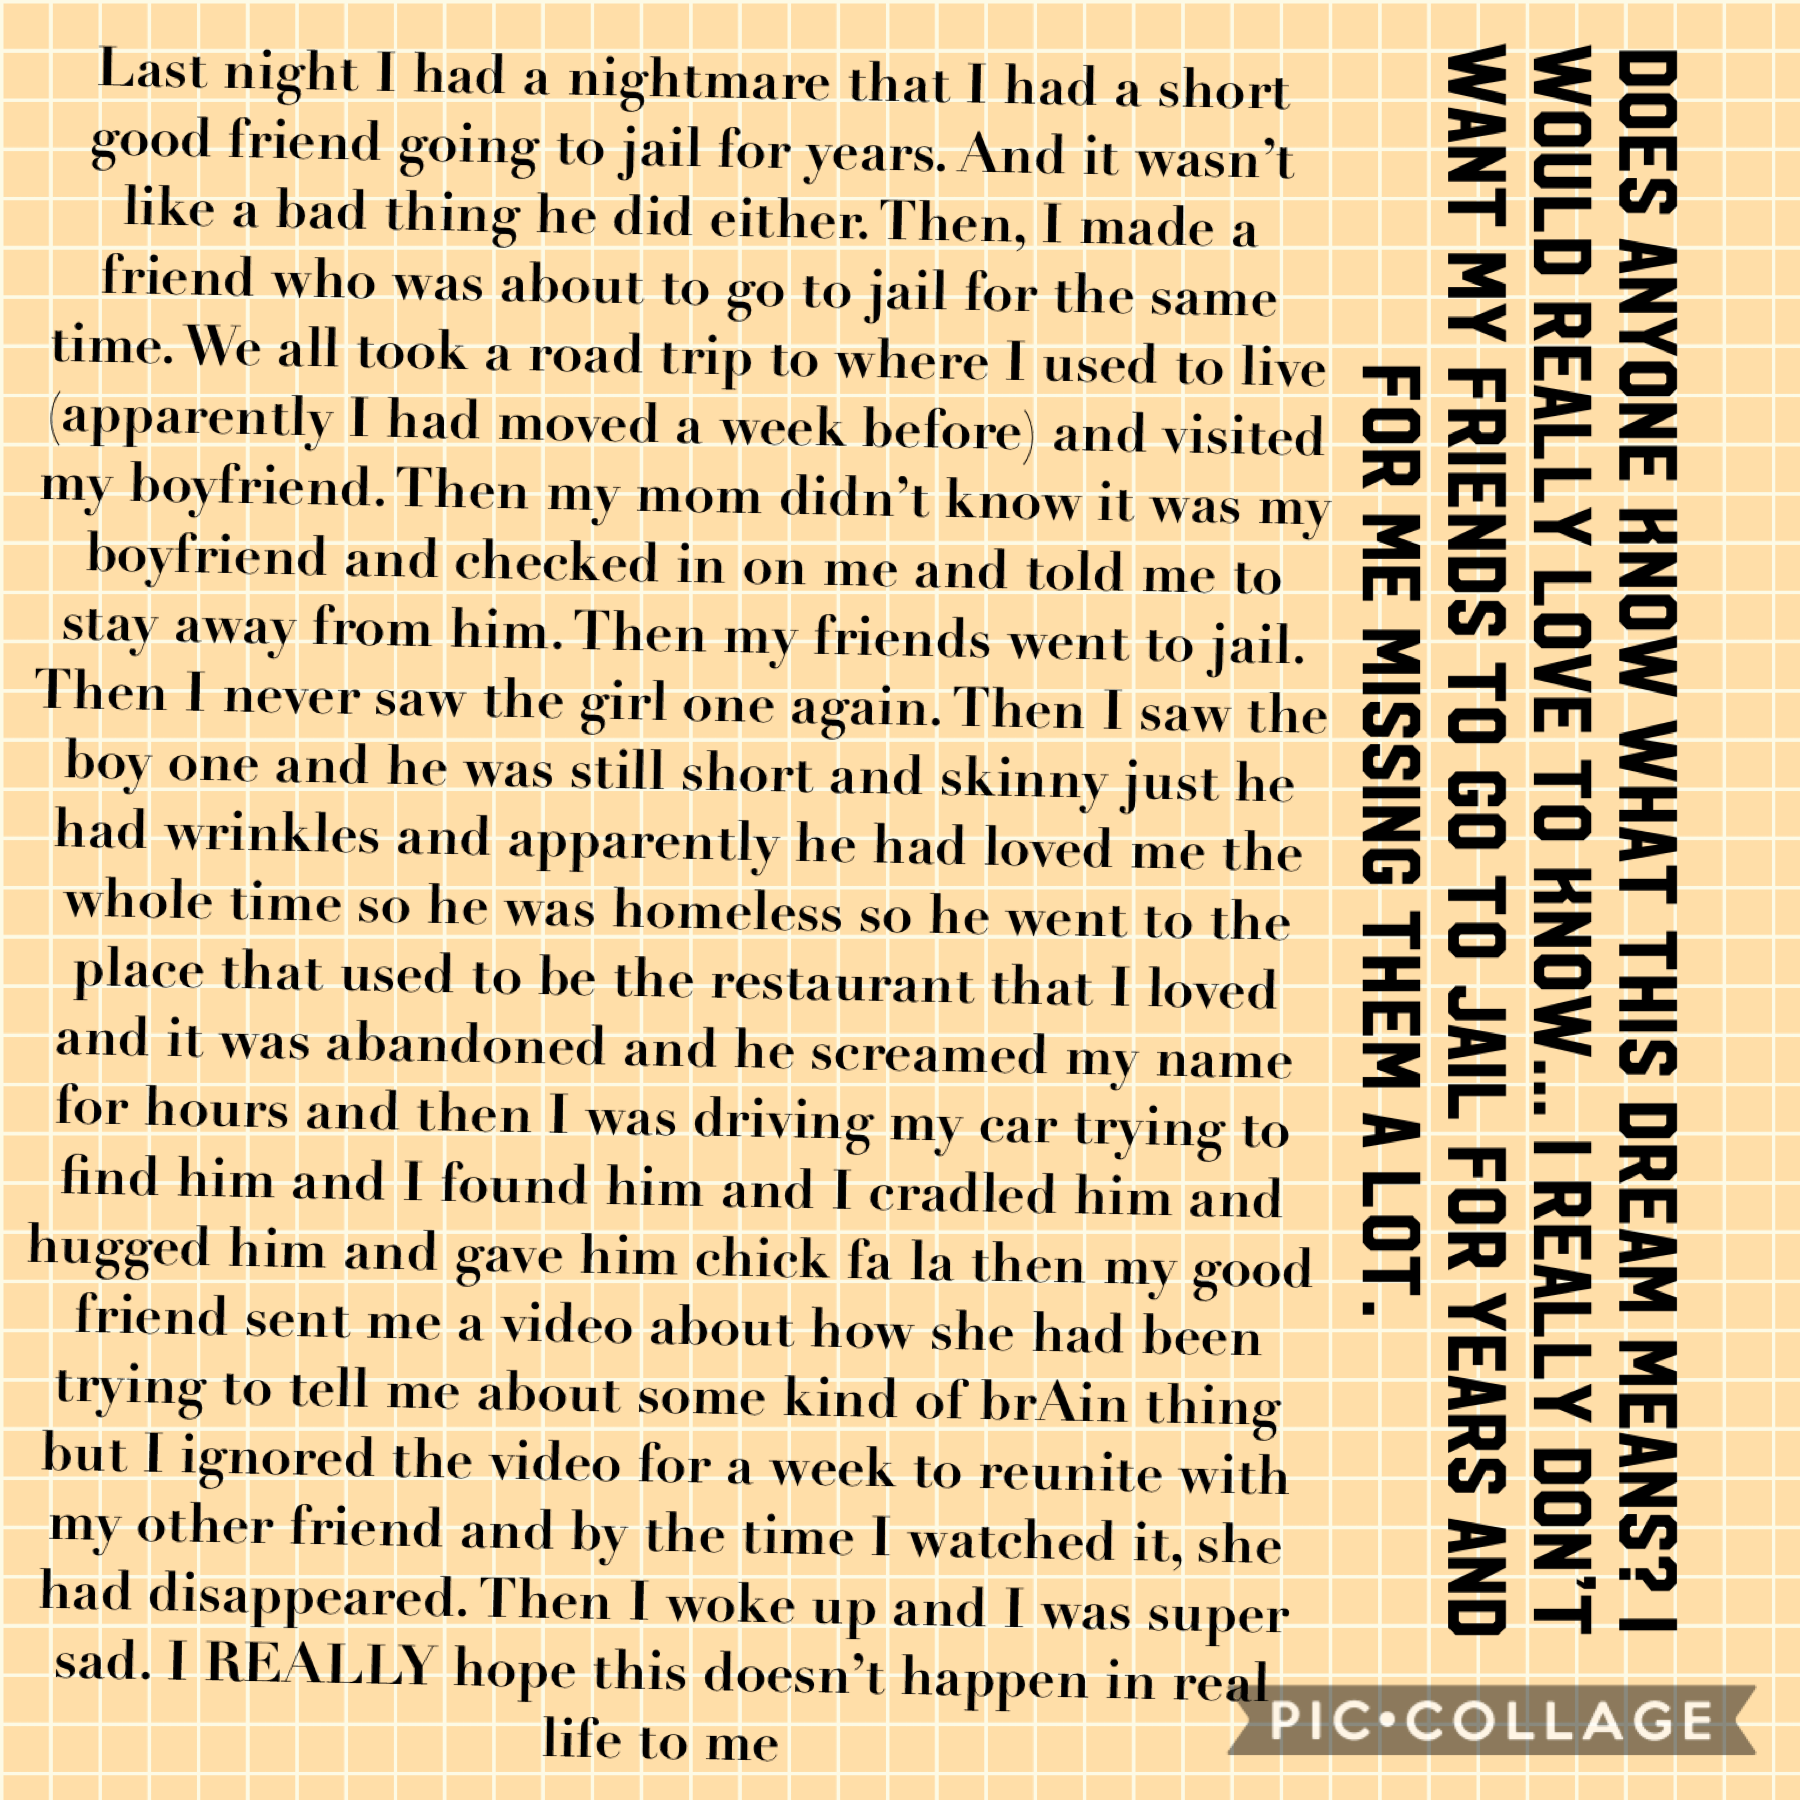 Please help me! I had this nightmare and I really want to know what it means!!!!